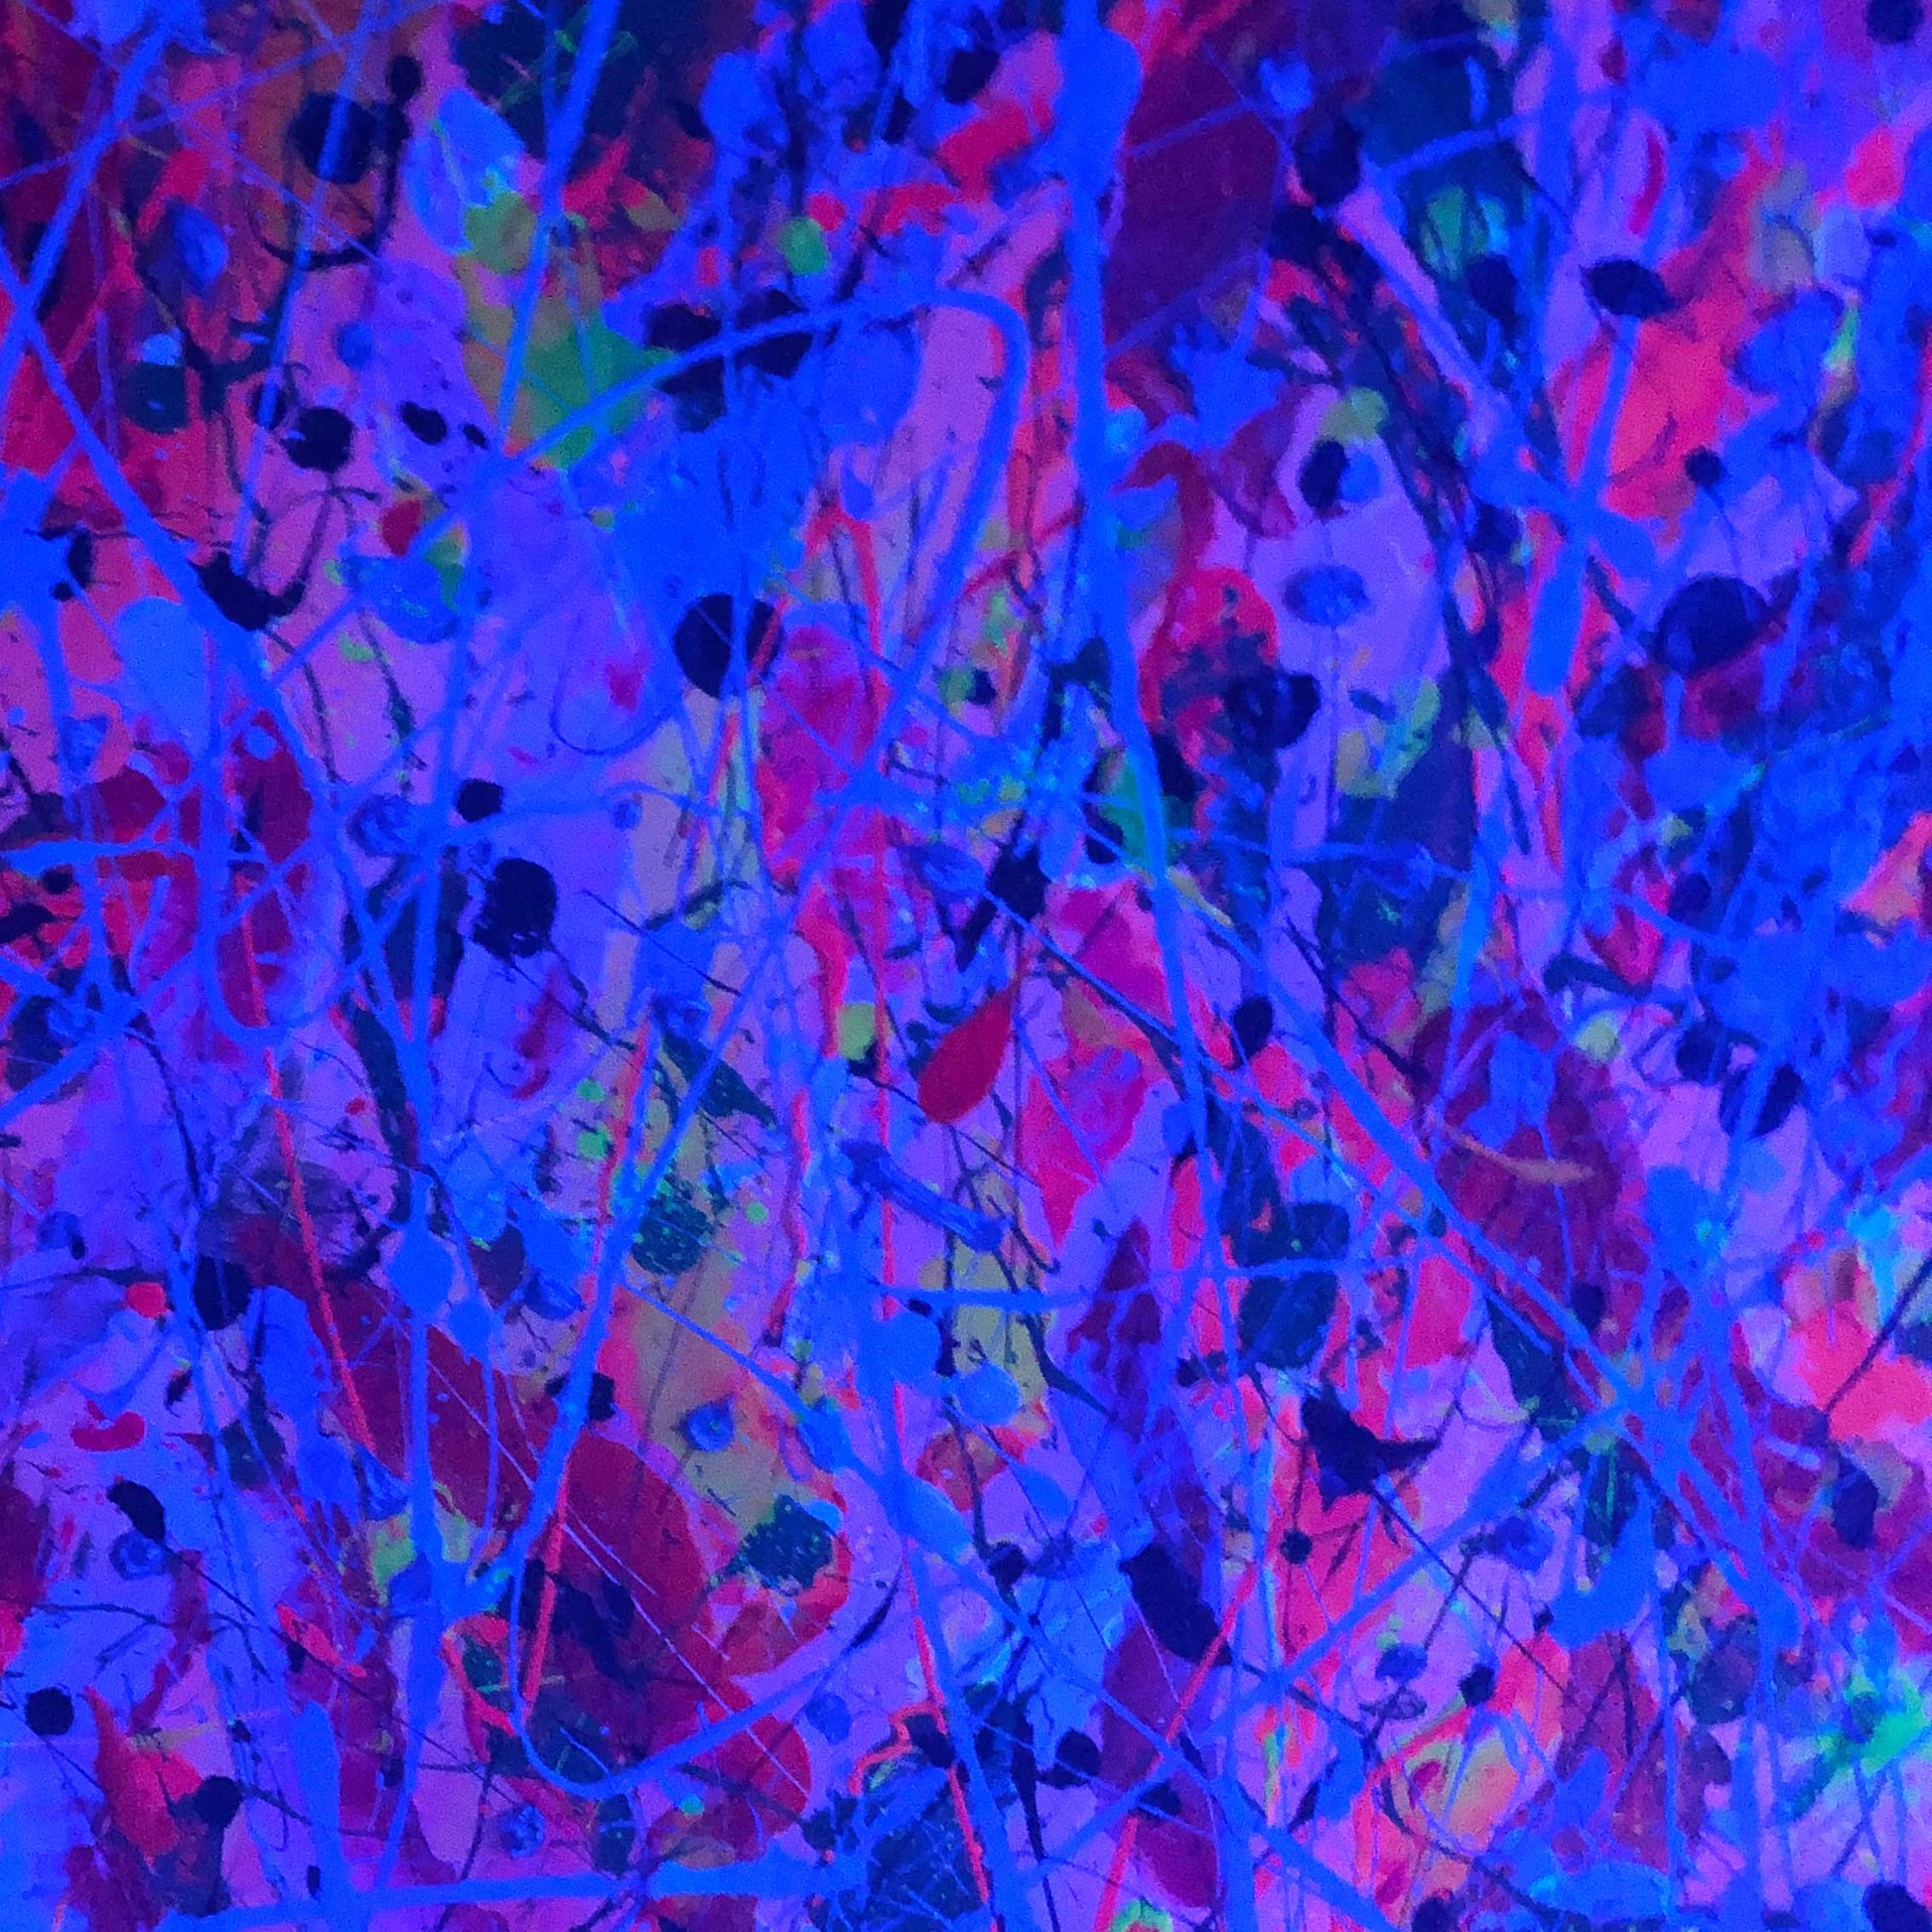 Part of the 'Alive' original painting seen glowing at night. Abstract, acrylic artwork by Bridget Bradley